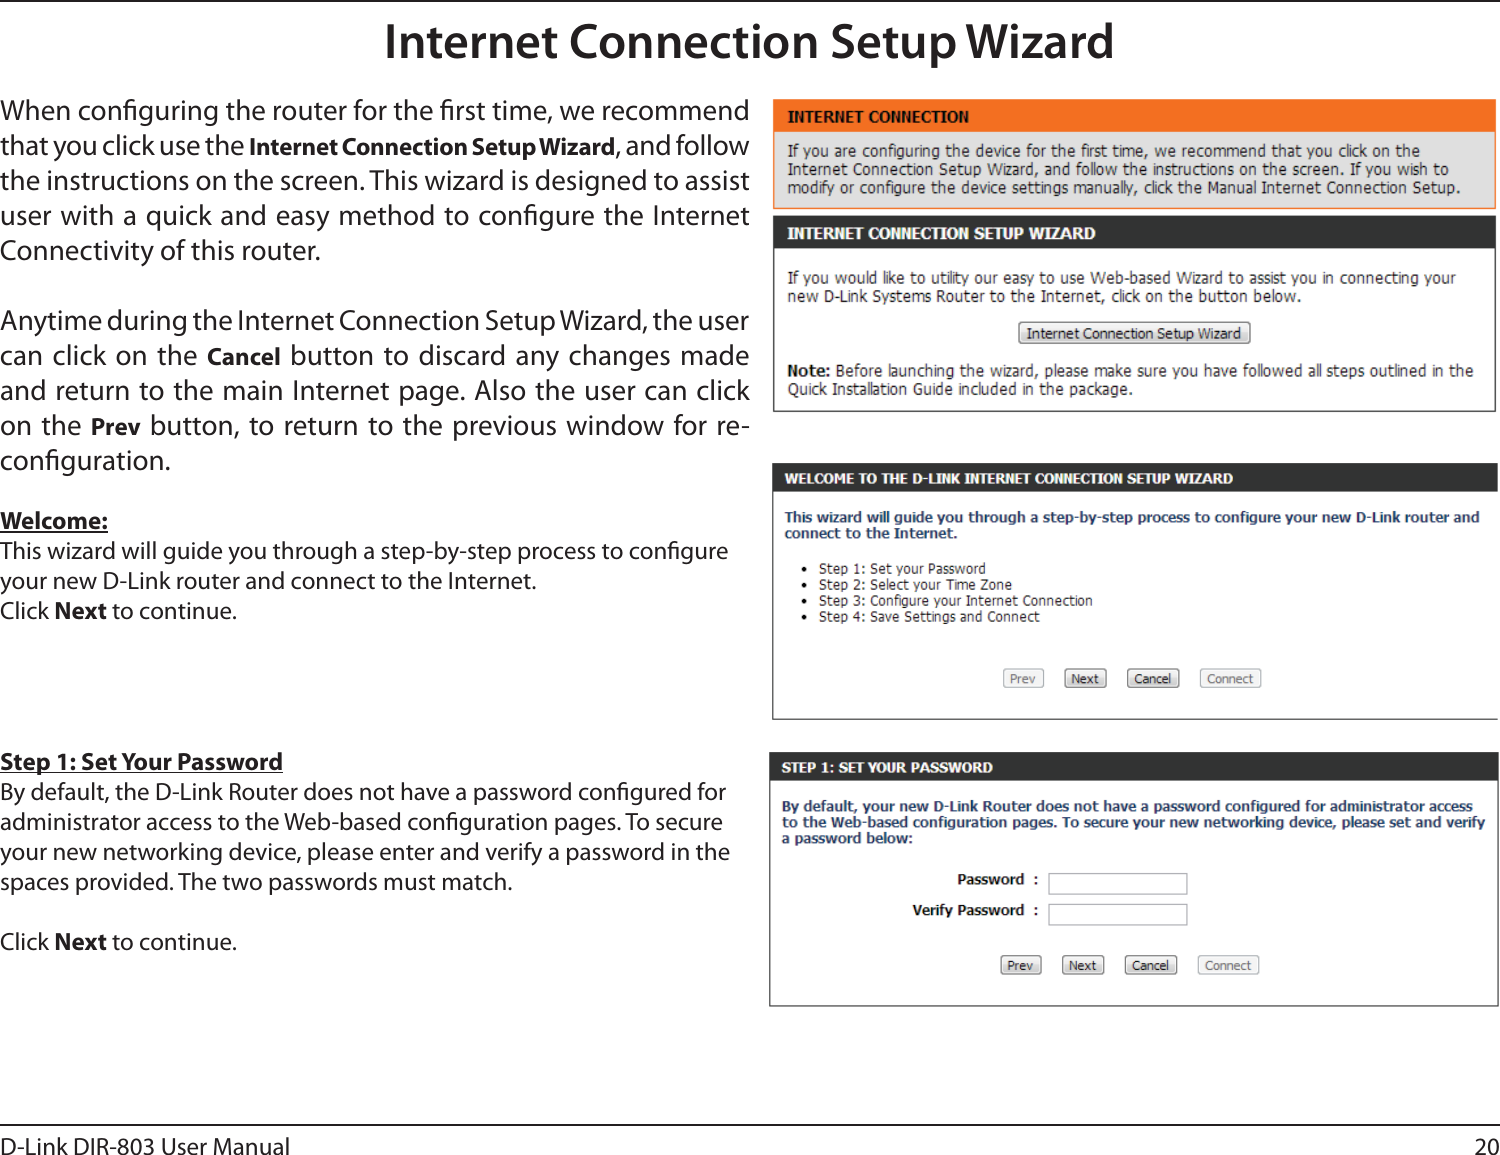 20D-Link DIR-803 User ManualInternet Connection Setup WizardWhen conguring the router for the rst time, we recommend that you click use the Internet Connection Setup Wizard, and follow the instructions on the screen. This wizard is designed to assist user with a quick and easy method to congure the Internet Connectivity of this router.Anytime during the Internet Connection Setup Wizard, the user can click on the Cancel button to discard any changes made and return to the main Internet page. Also the user can click on the Prev button, to return to the previous window for re-conguration.Welcome:This wizard will guide you through a step-by-step process to congure your new D-Link router and connect to the Internet. Click Next to continue.Step 1: Set Your PasswordBy default, the D-Link Router does not have a password congured for administrator access to the Web-based conguration pages. To secure your new networking device, please enter and verify a password in the spaces provided. The two passwords must match.Click Next to continue.